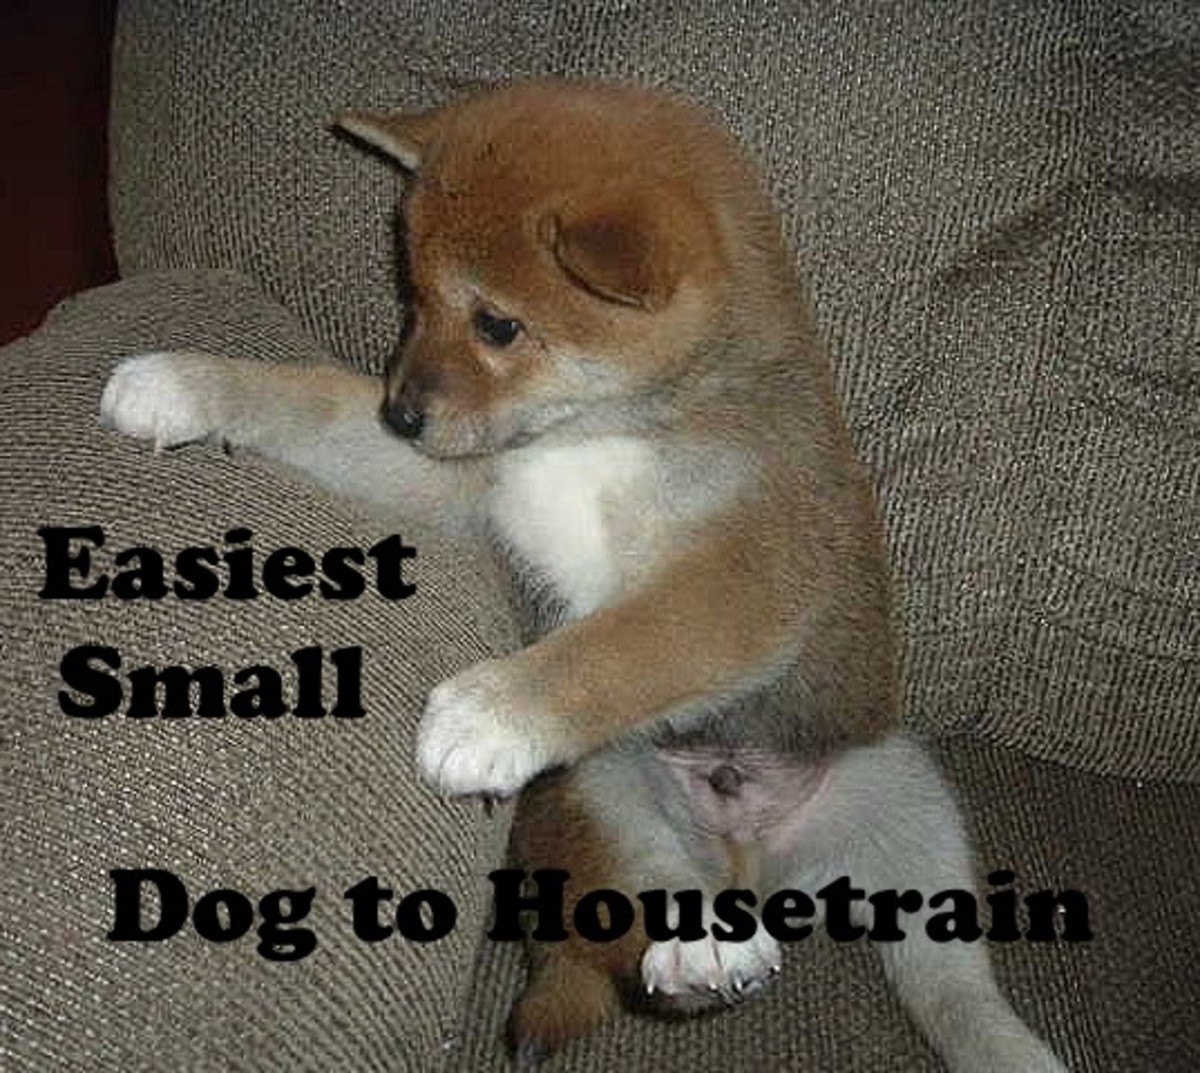 easy to house train small dog breeds